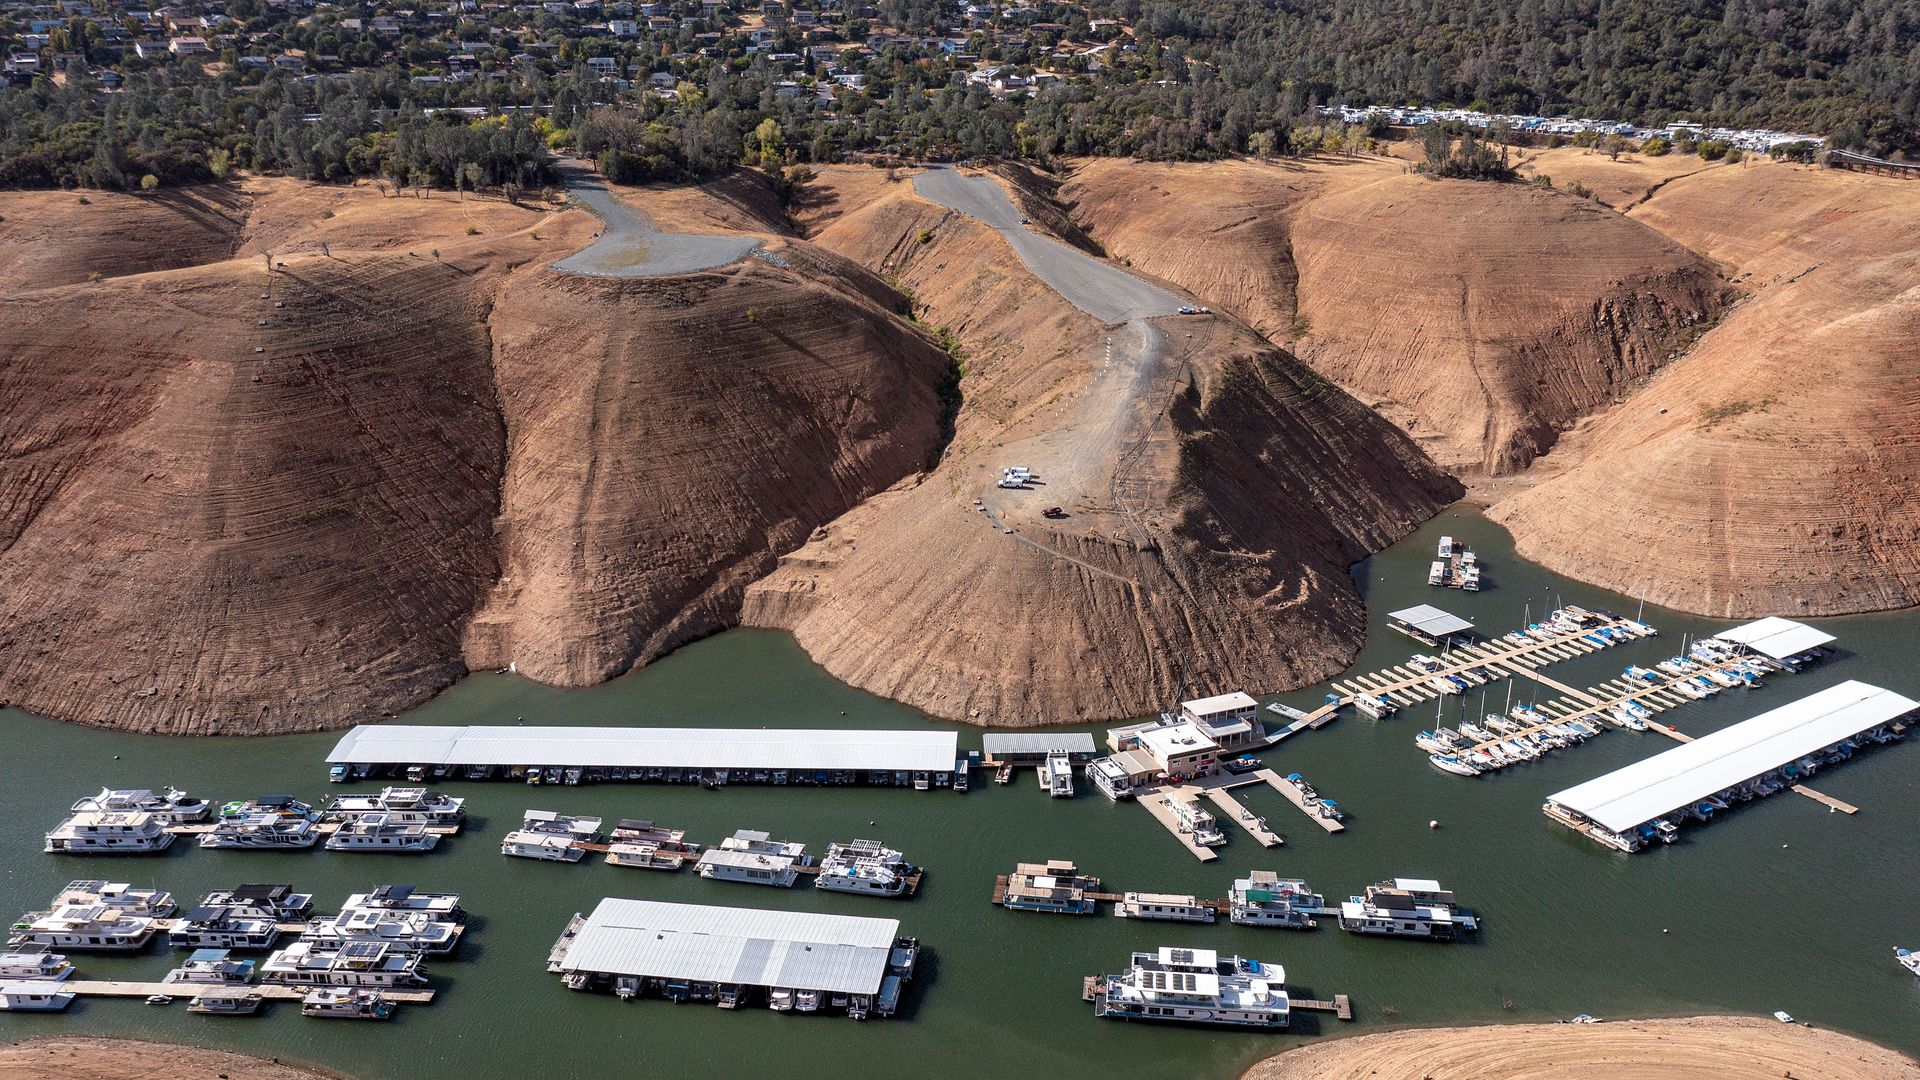 Houseboats on Lake Oroville during a drought in California that has dried out the lake bottom.